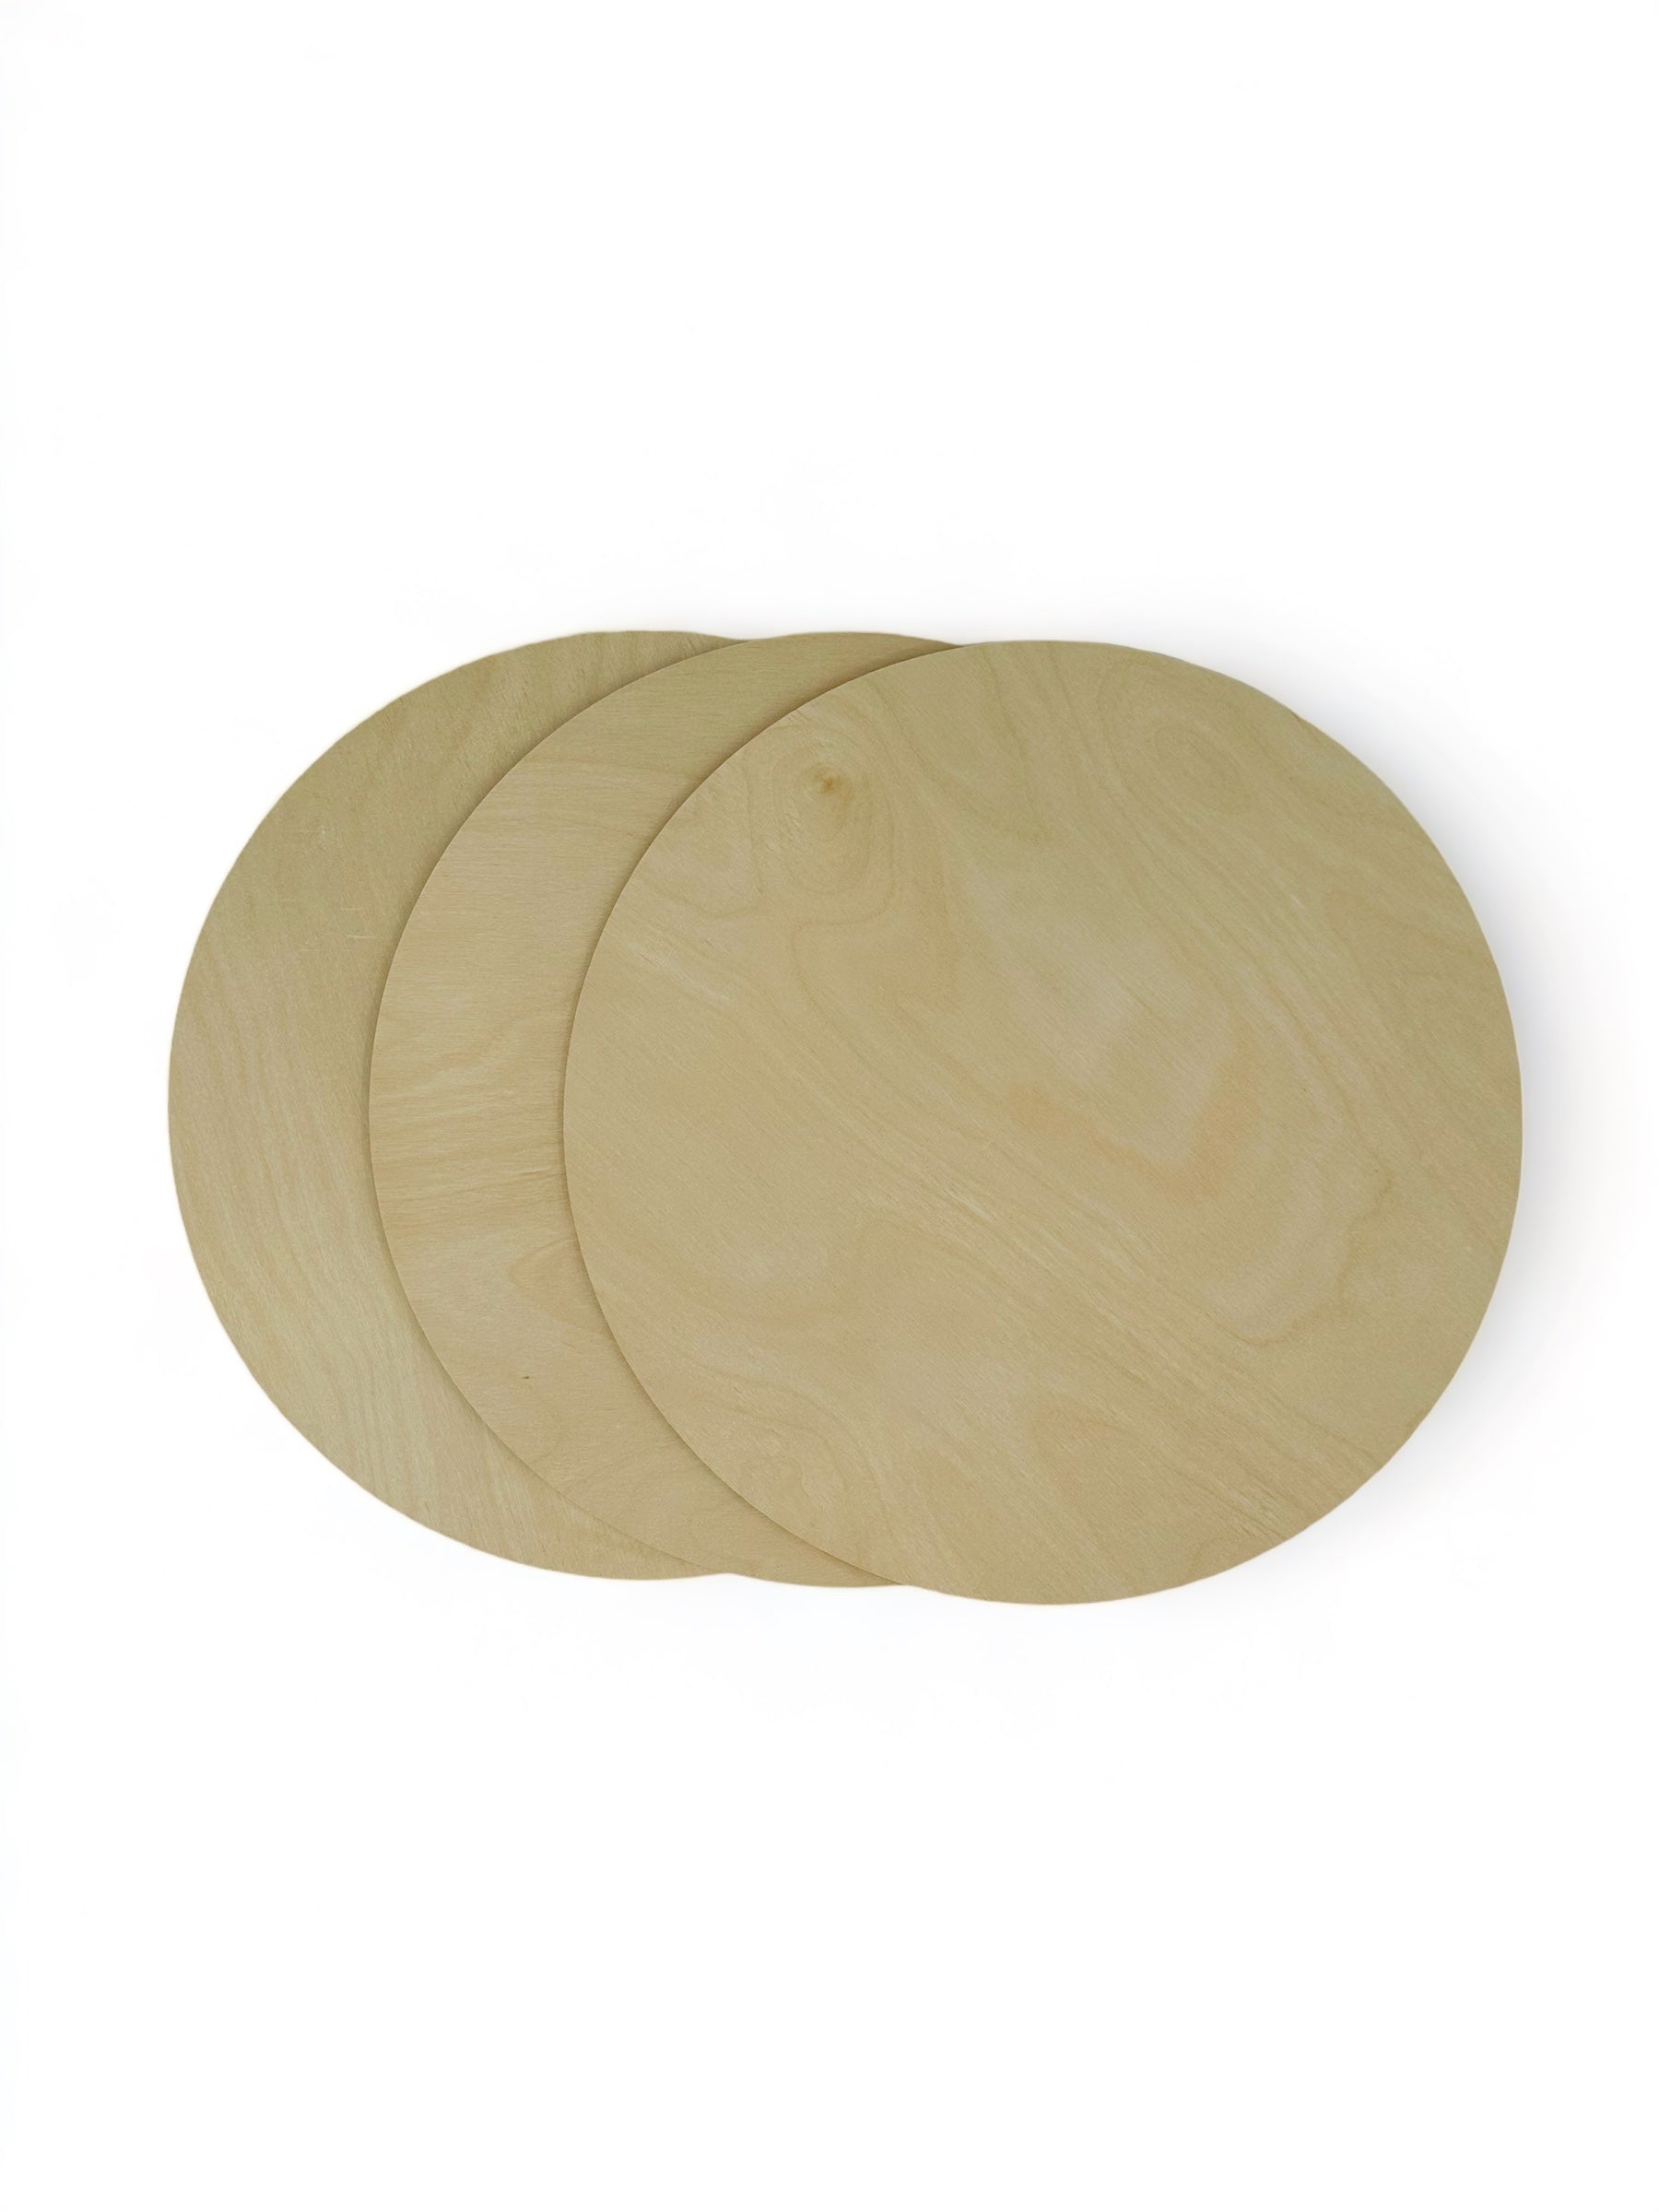 3 pack of 15 inch birch plywood wooden crafting round cutouts for art and decorating projects